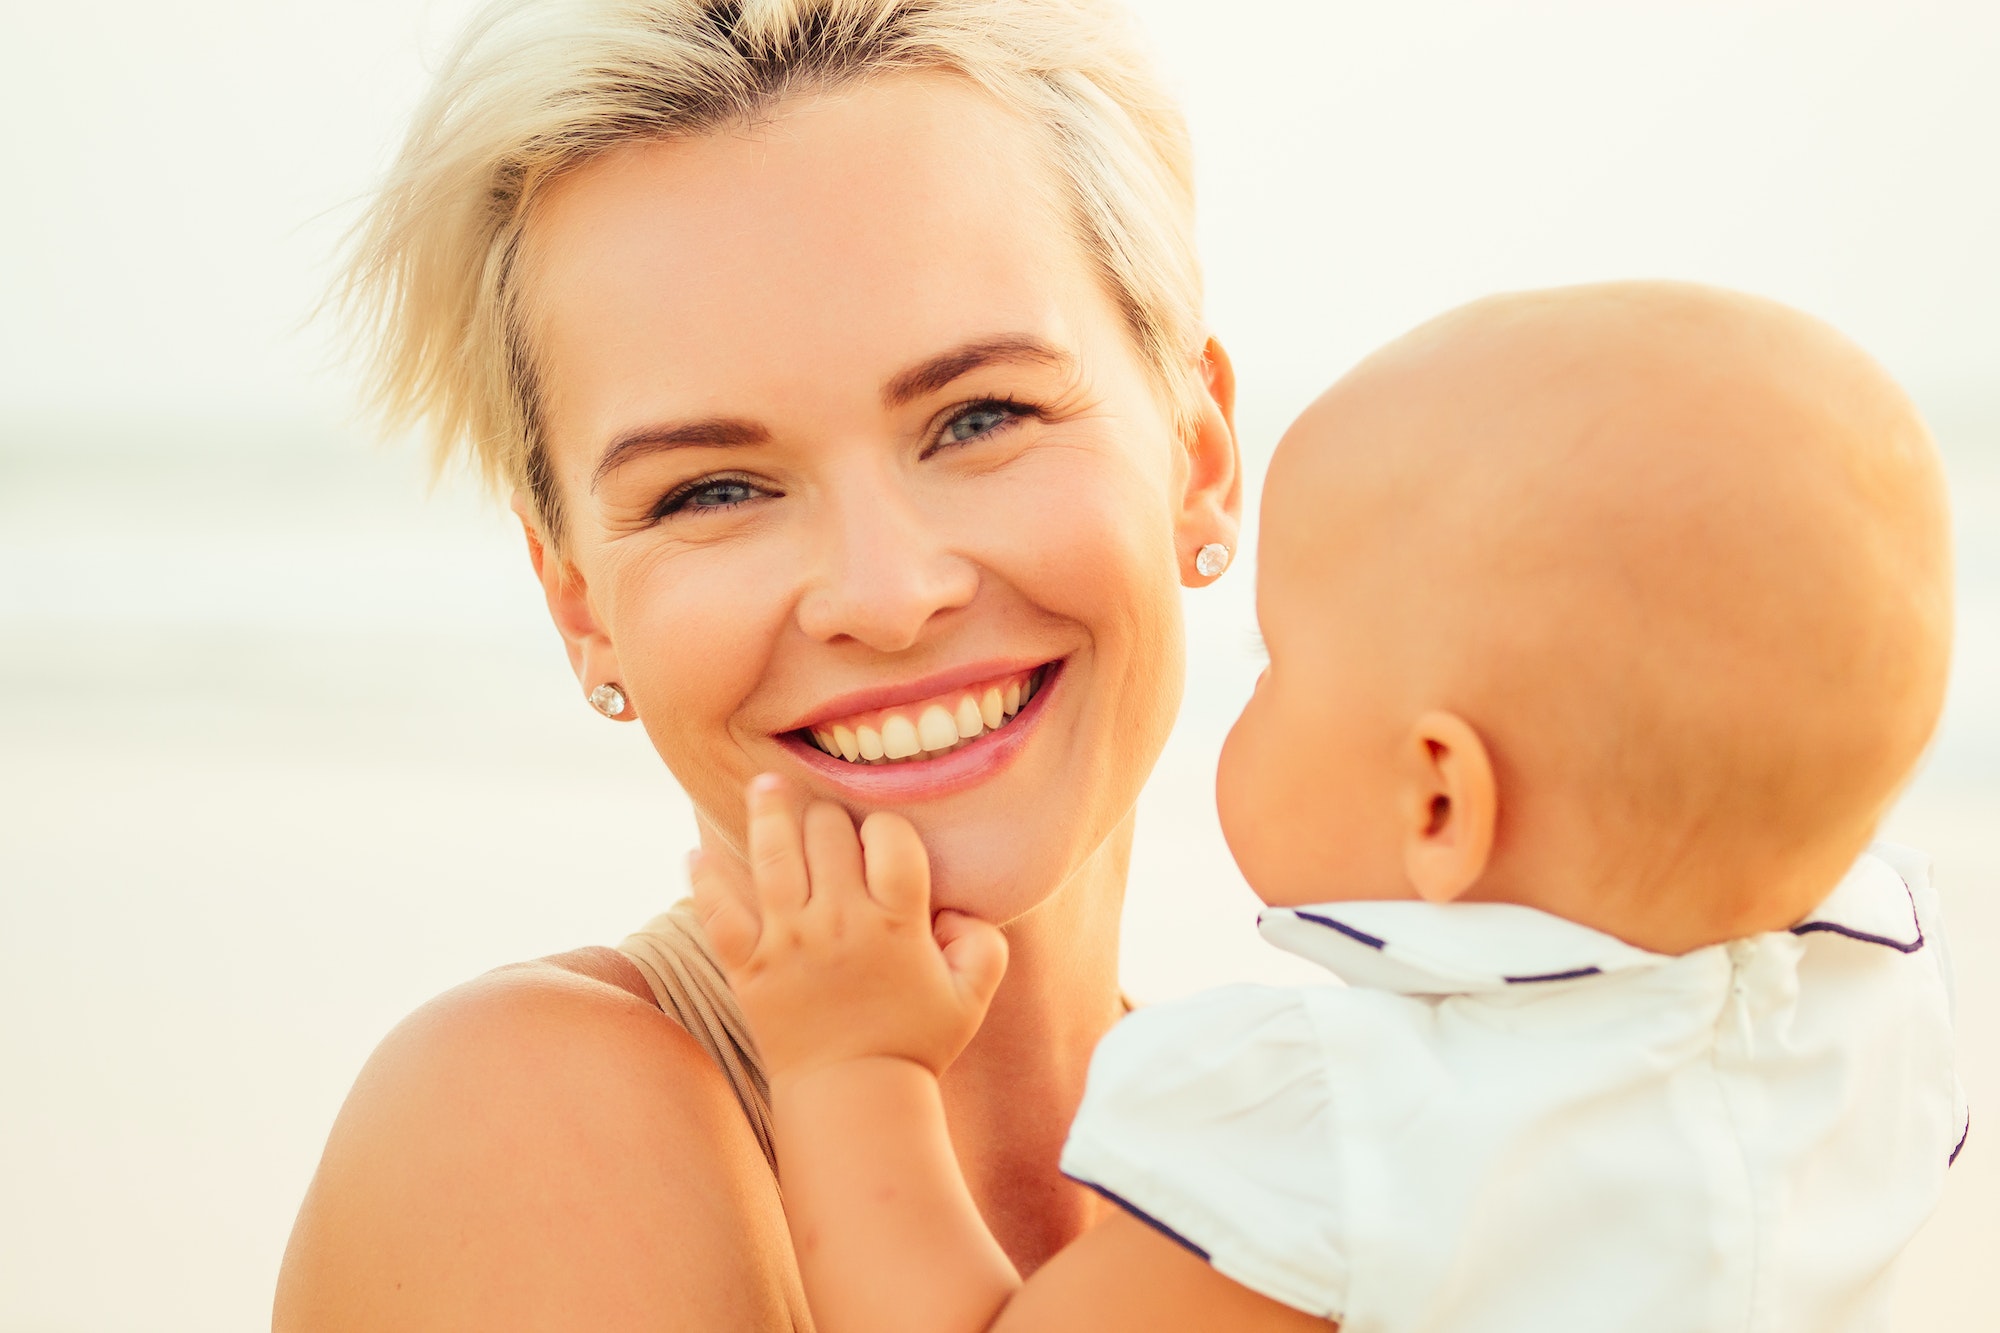 breast-feeding on breast-feeding concept. beautiful woman with baby on the summer beach at sunset